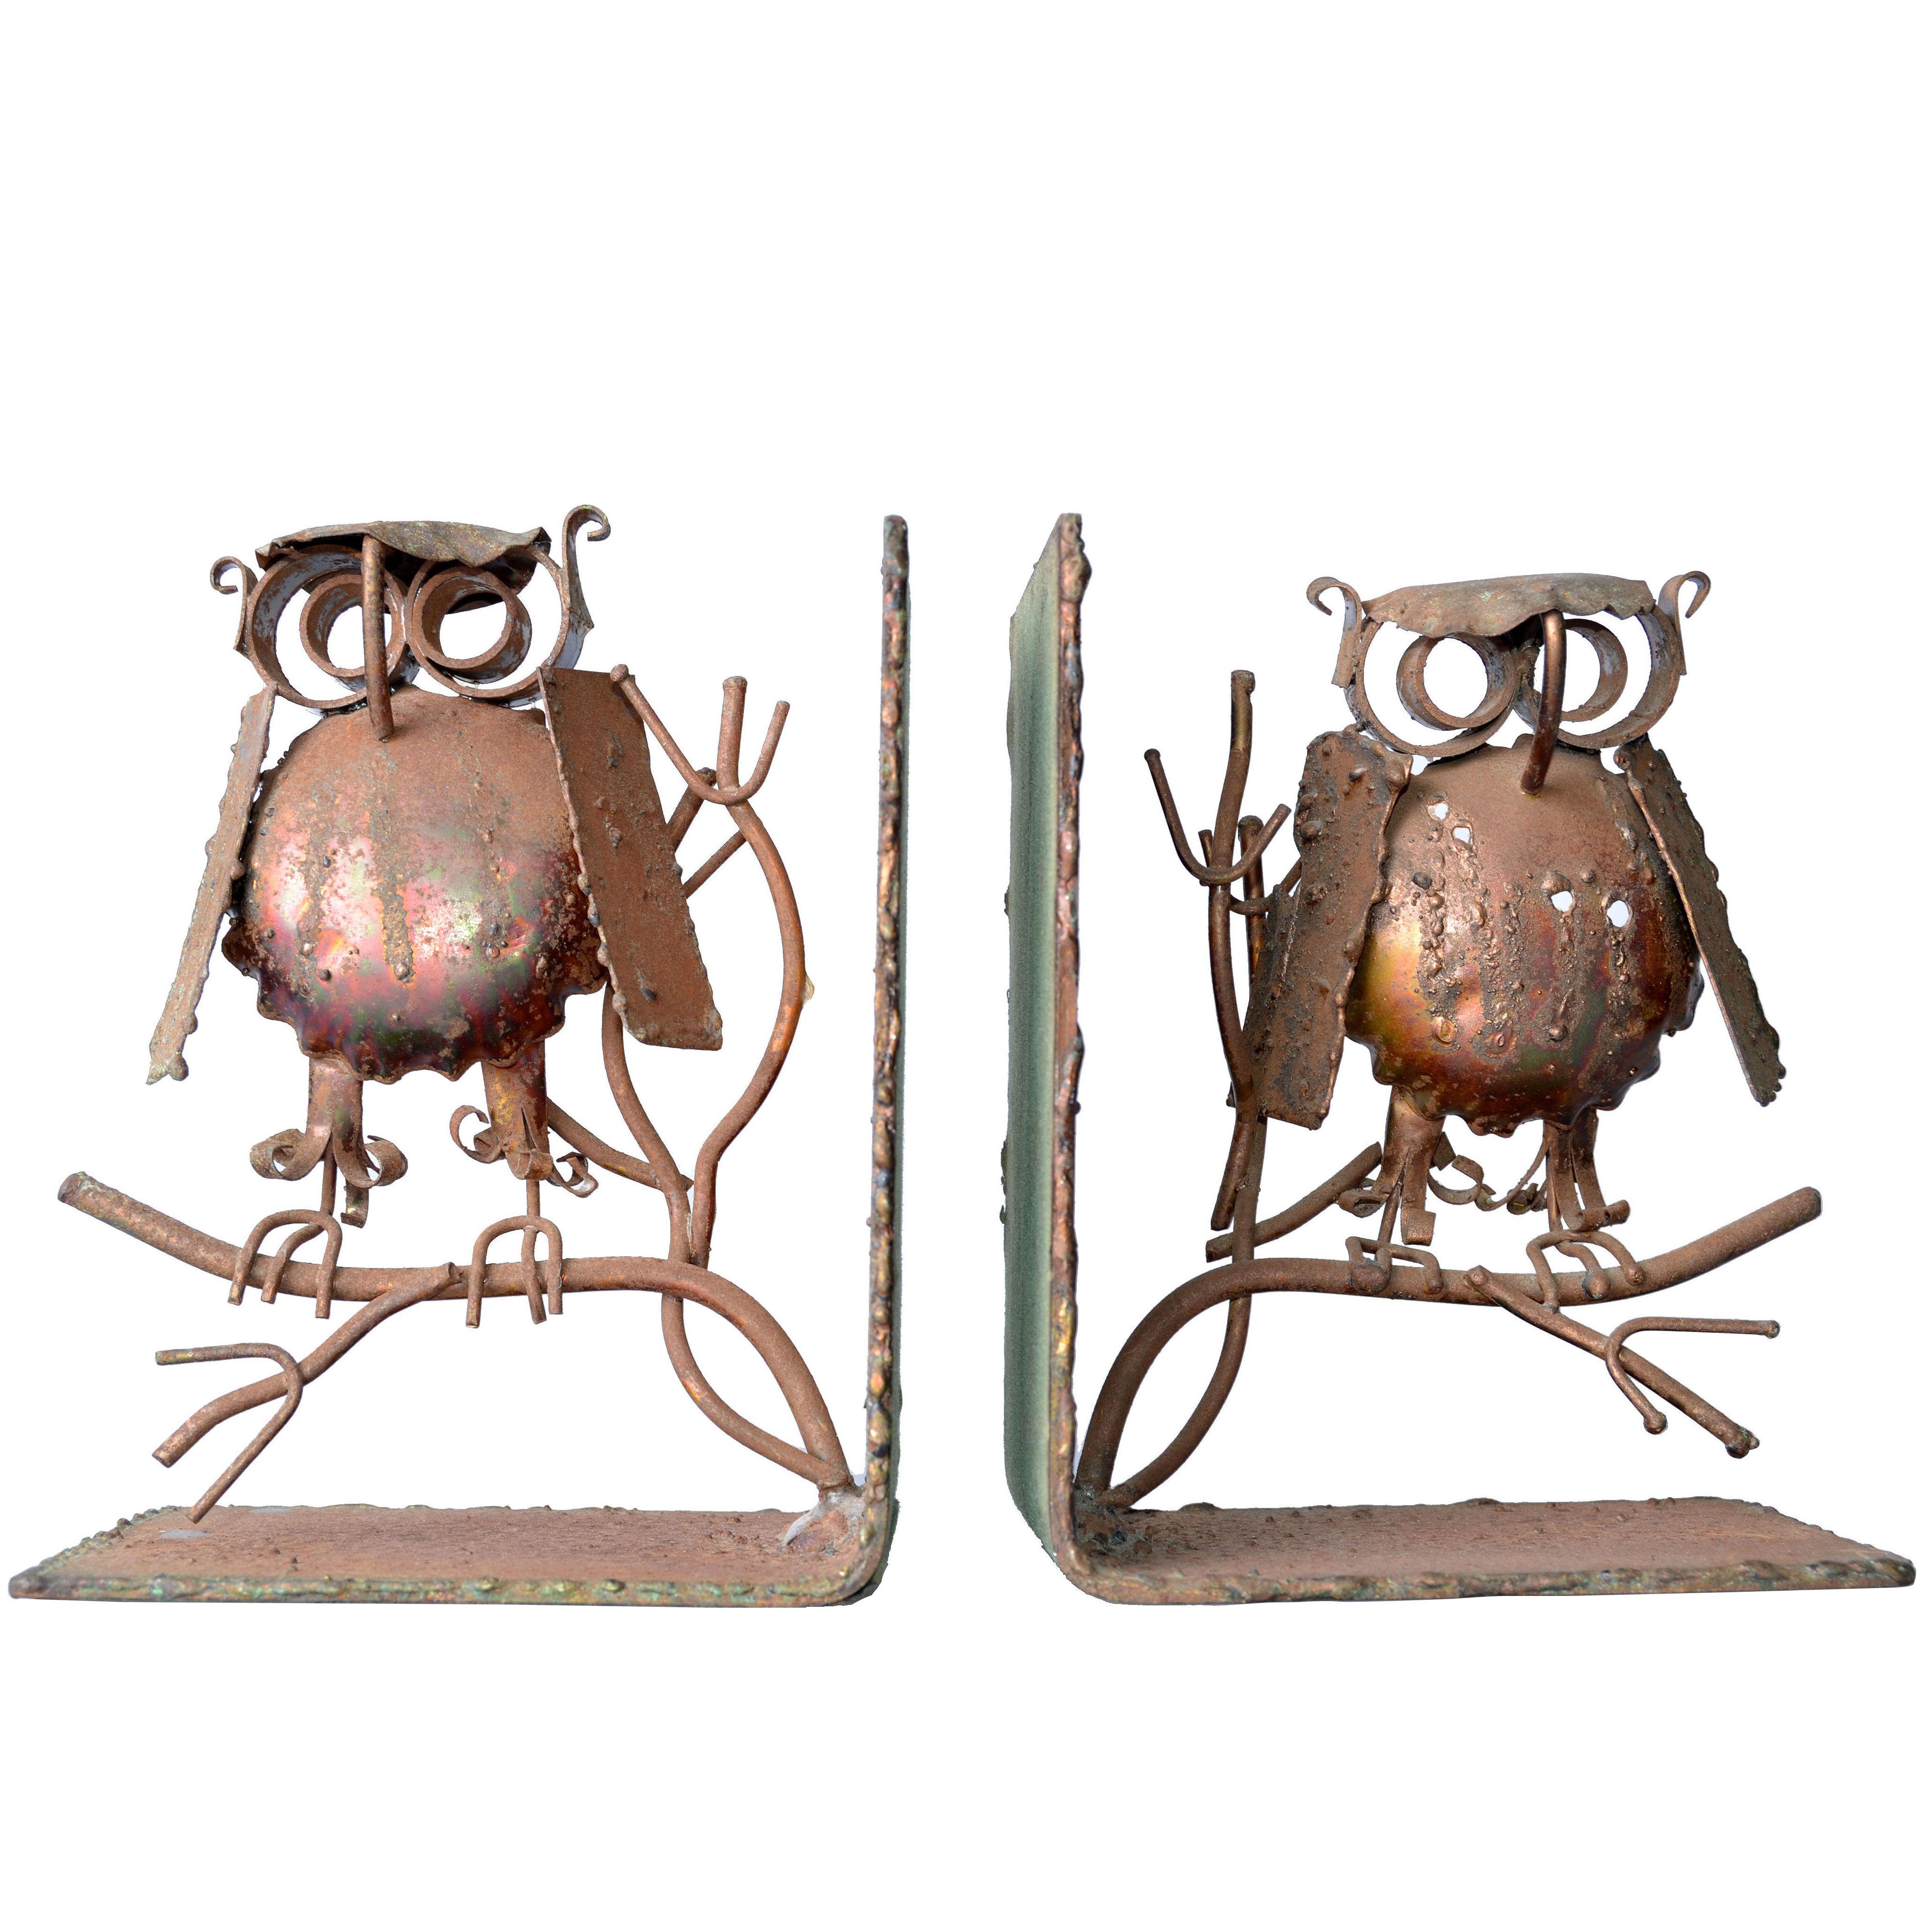 Curtis Jere Copper Owl Bookends, a Pair